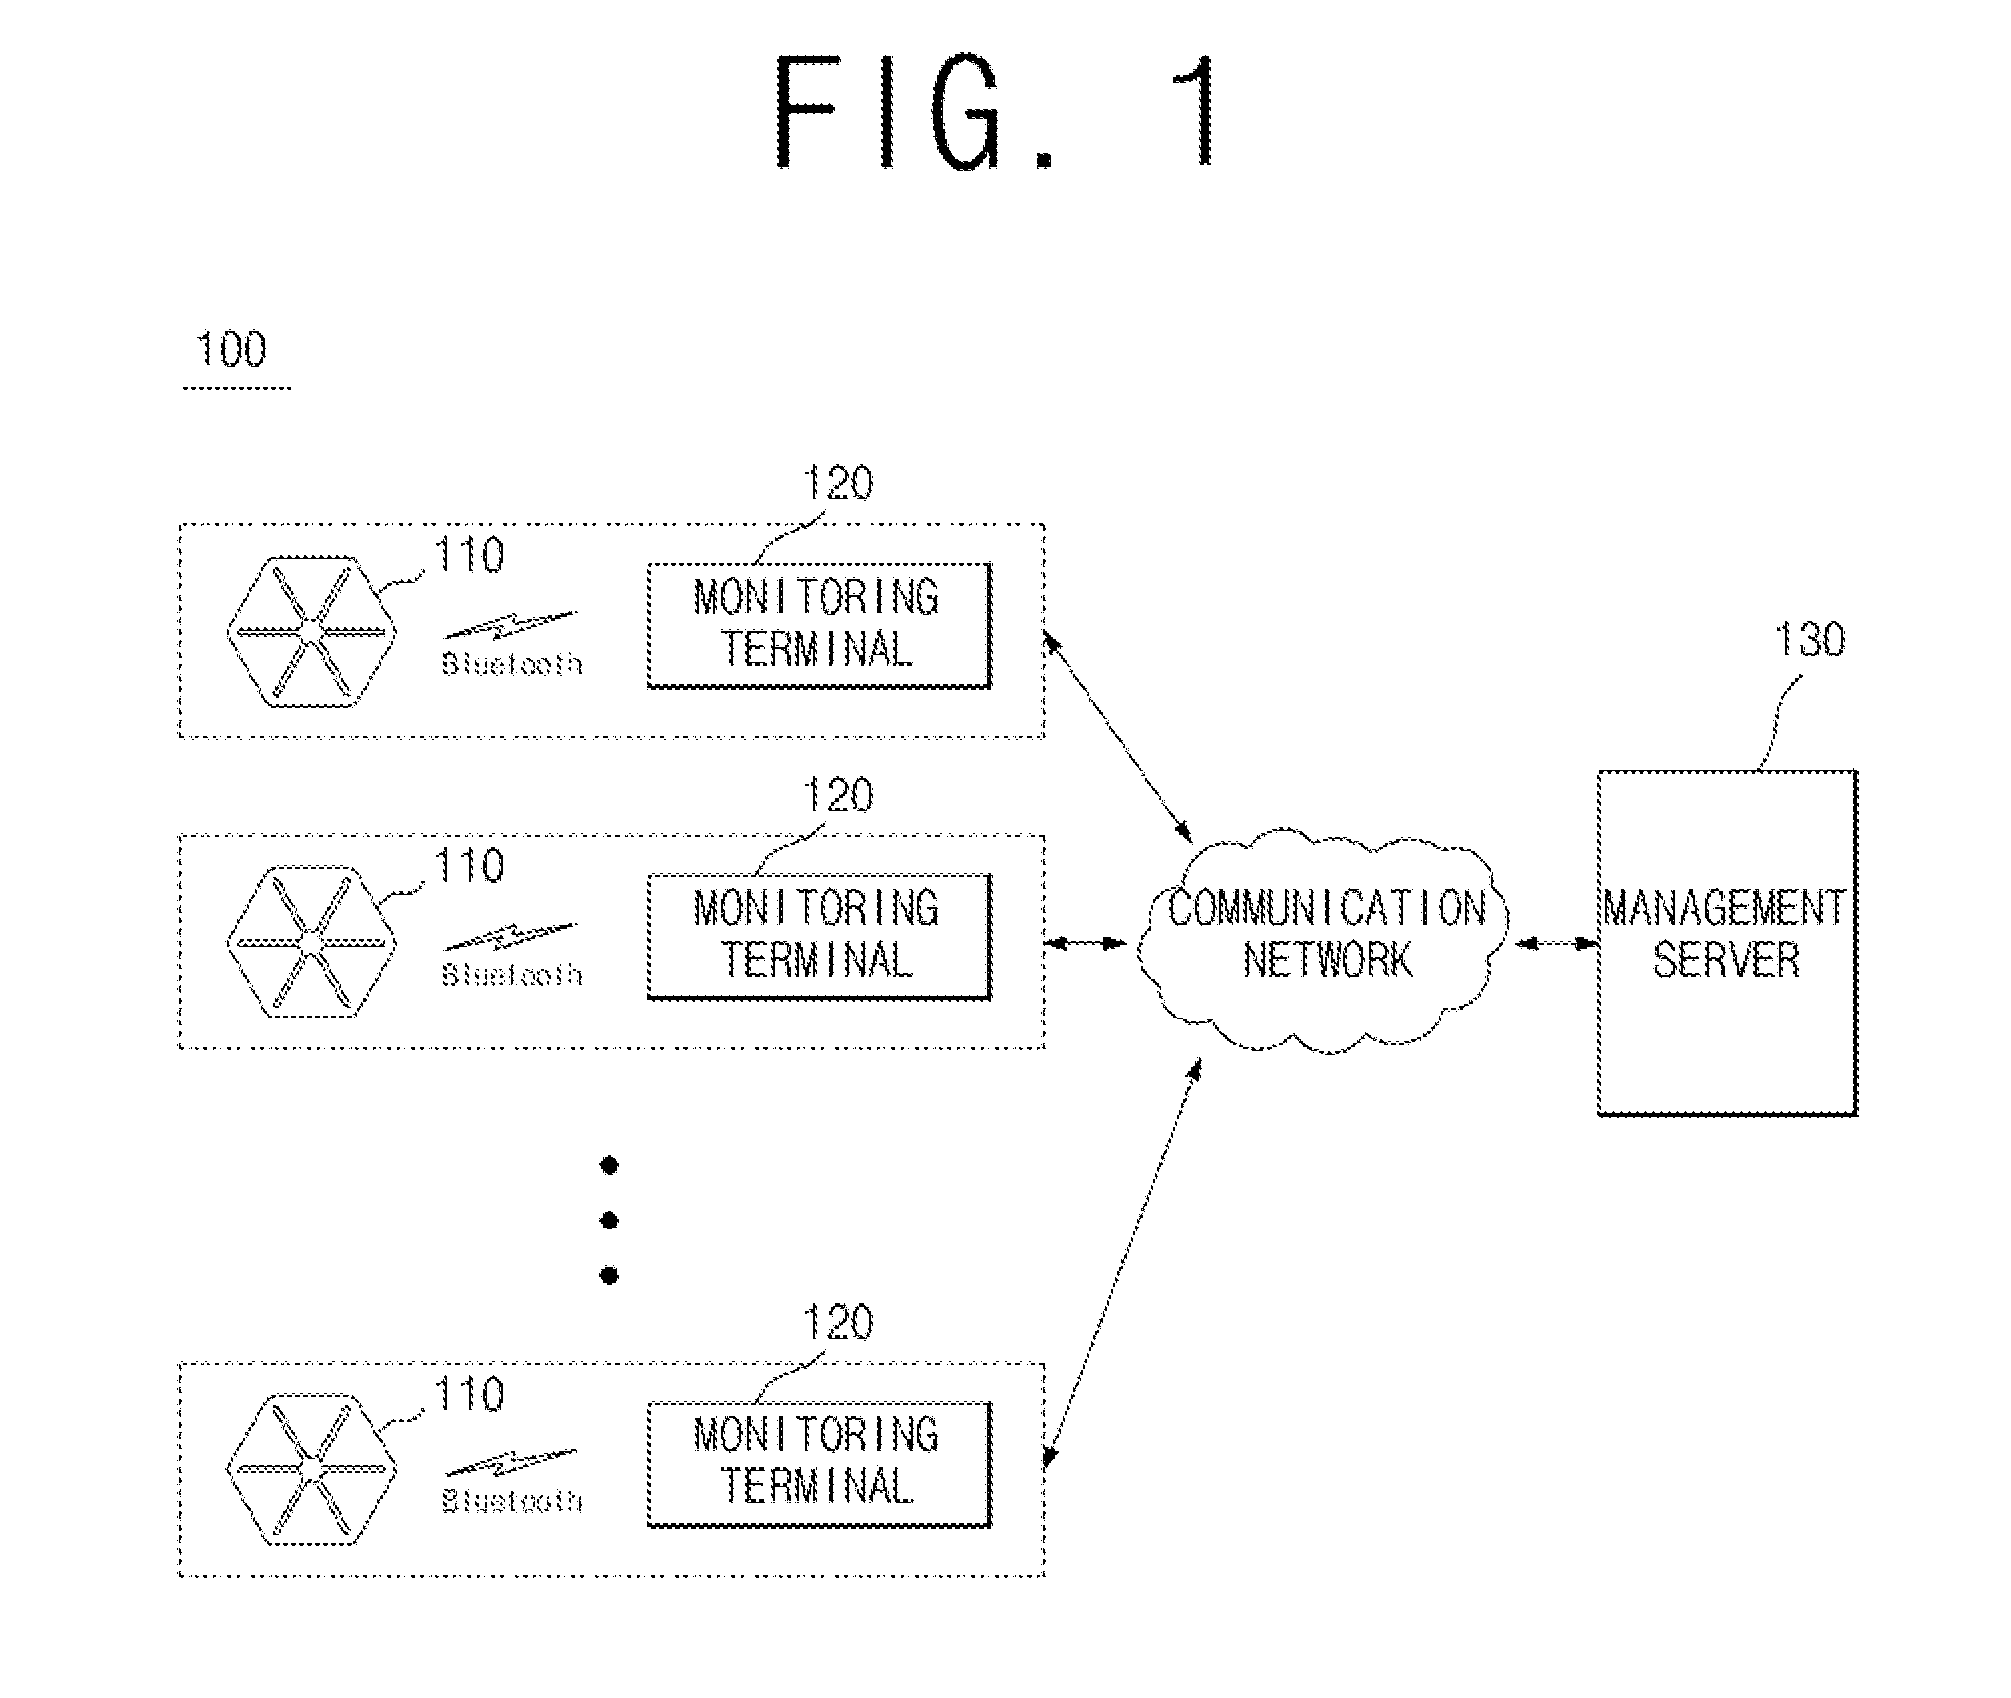 Animal exercise assist device and animal activity information monitoring system and method